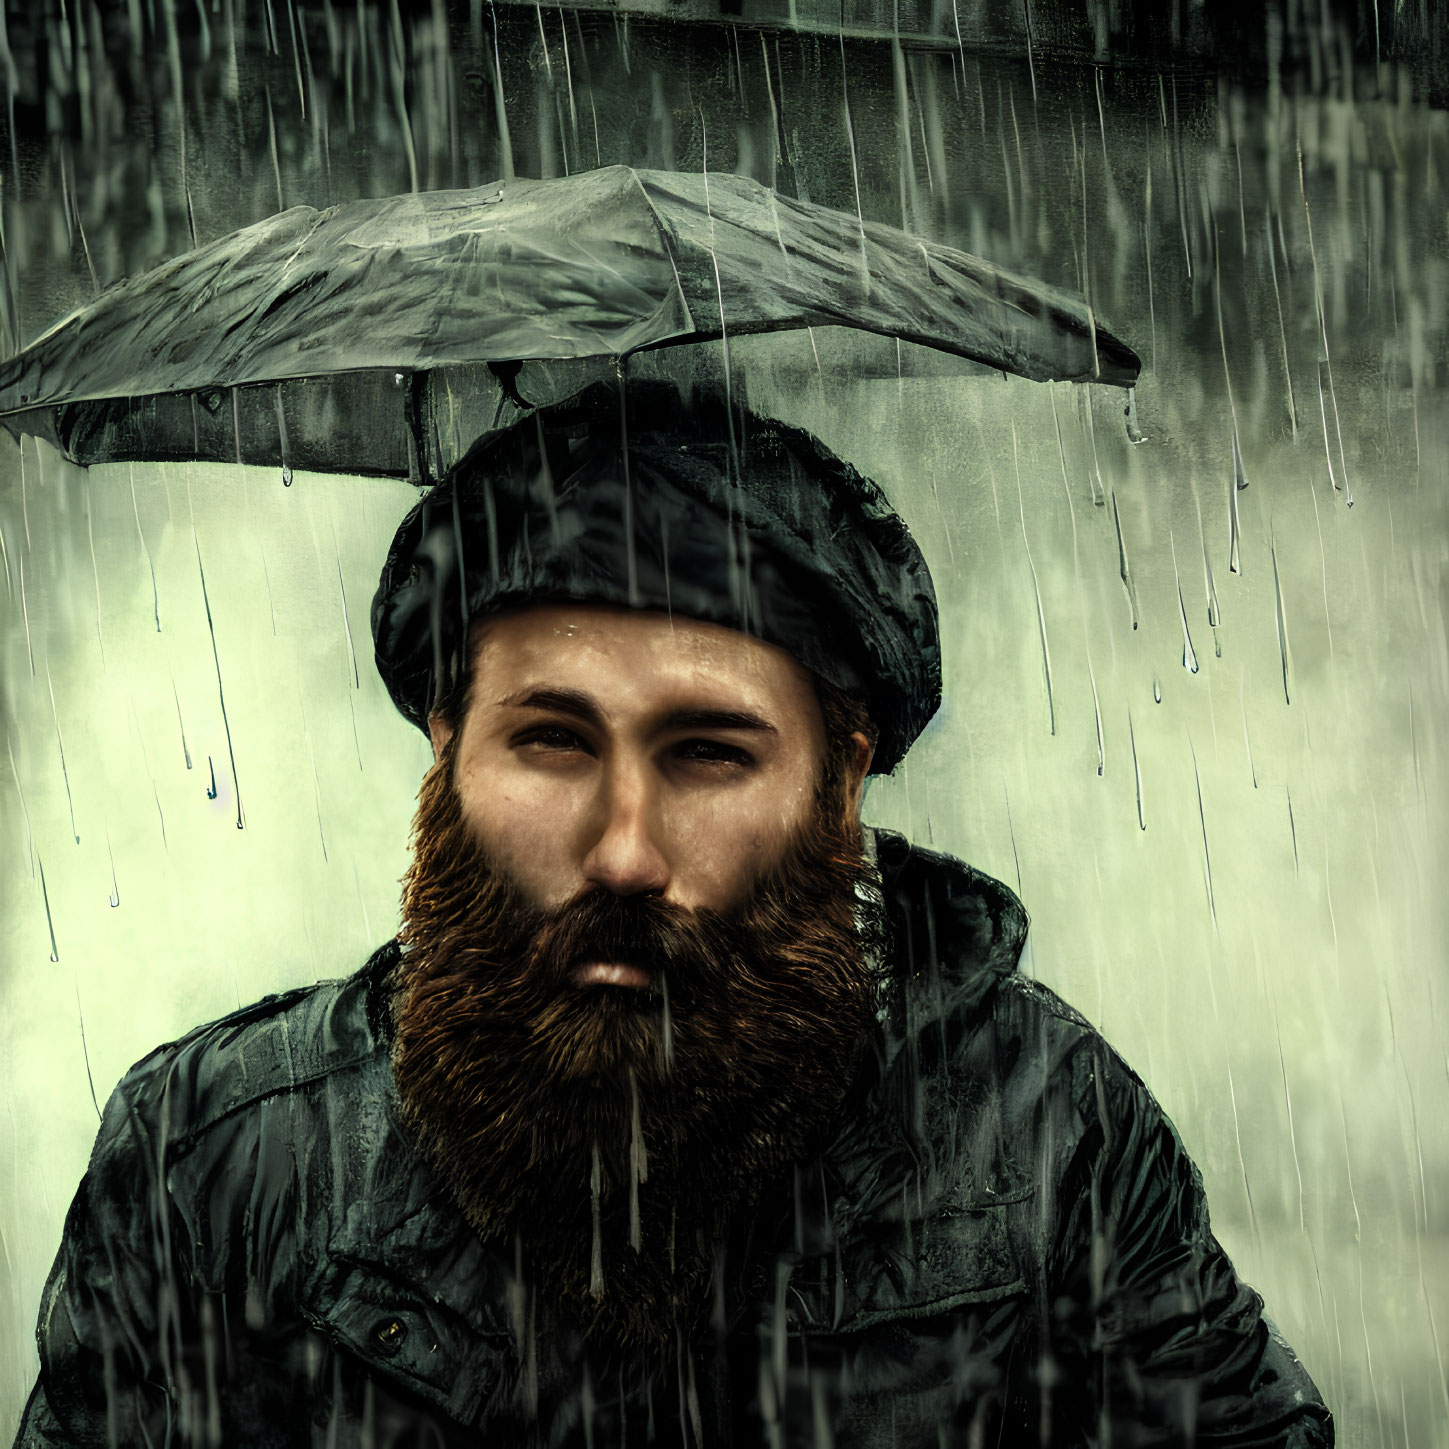 Bearded man in beret and raincoat with umbrella in heavy rain